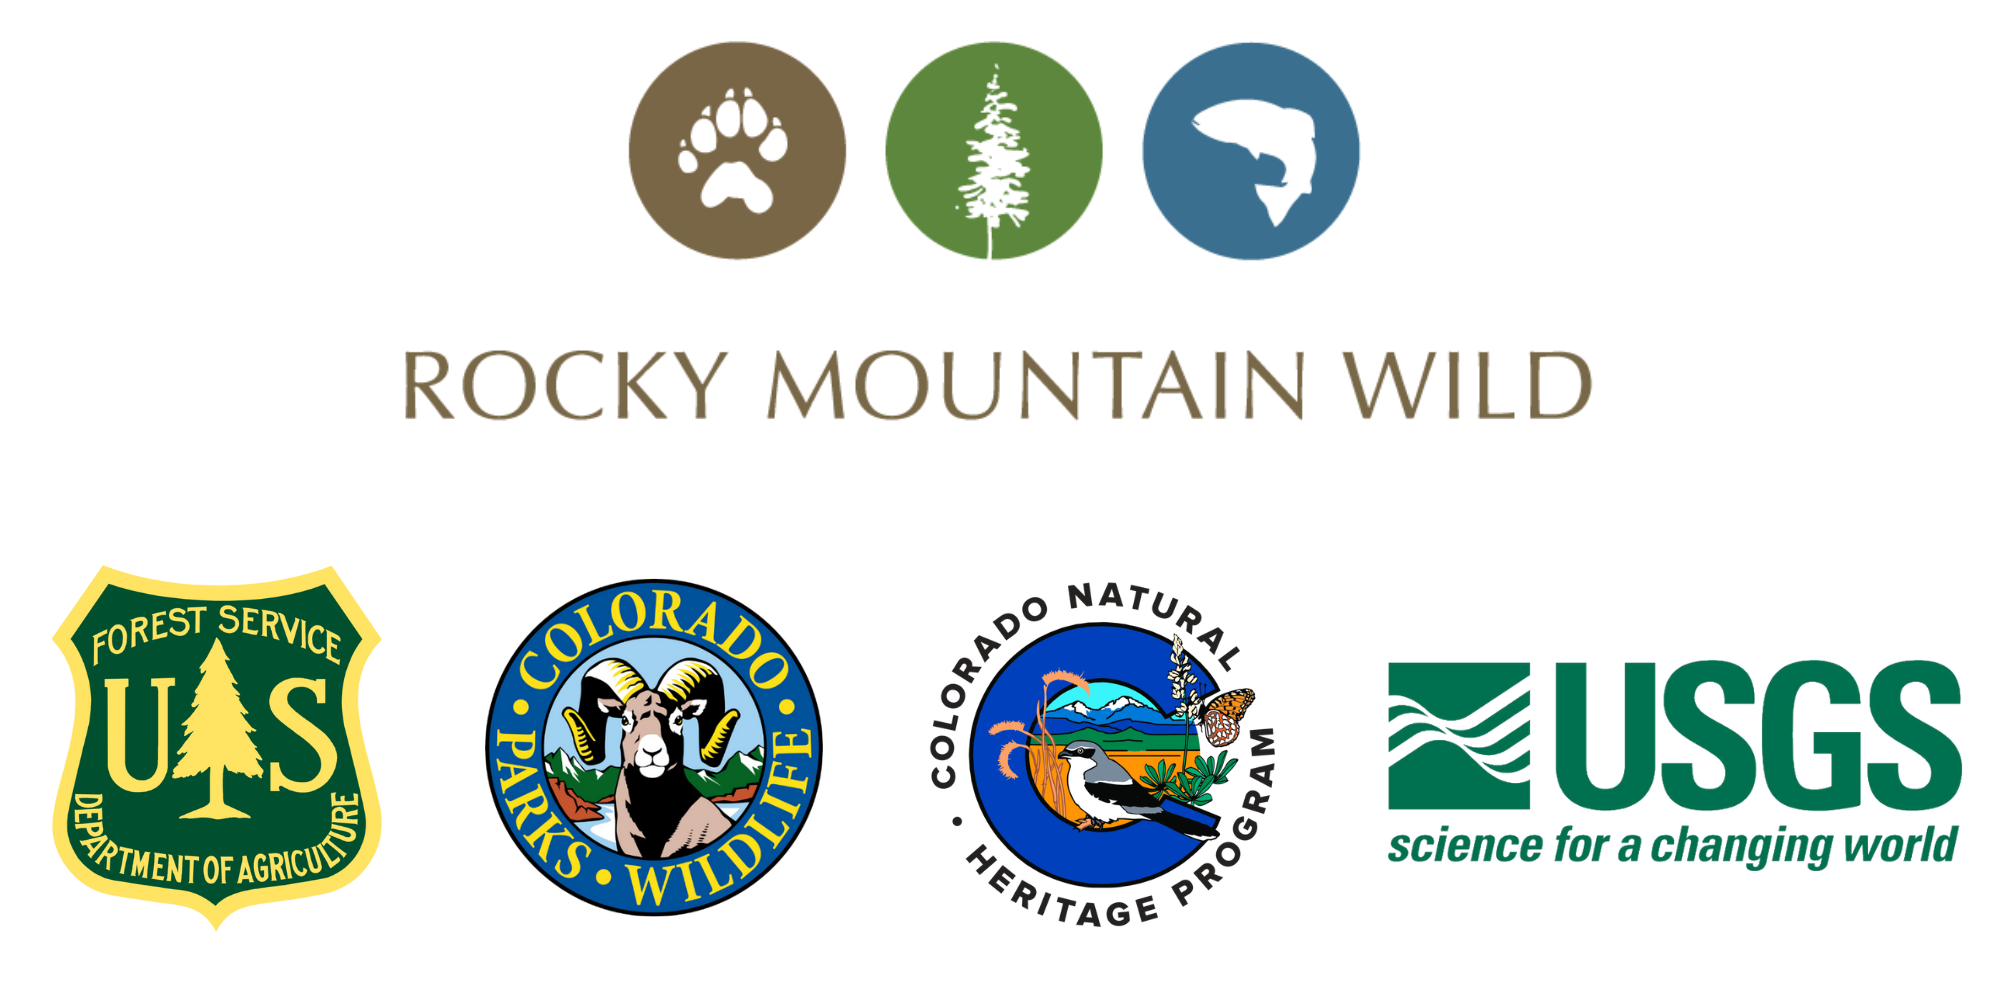 A series of logos. On the top is the Rocky Mountain Wild logo. Below that is the US Forest Service, Colorado Parks and Wildlife, Colorado Natural Heritage Program, and USGS logos.